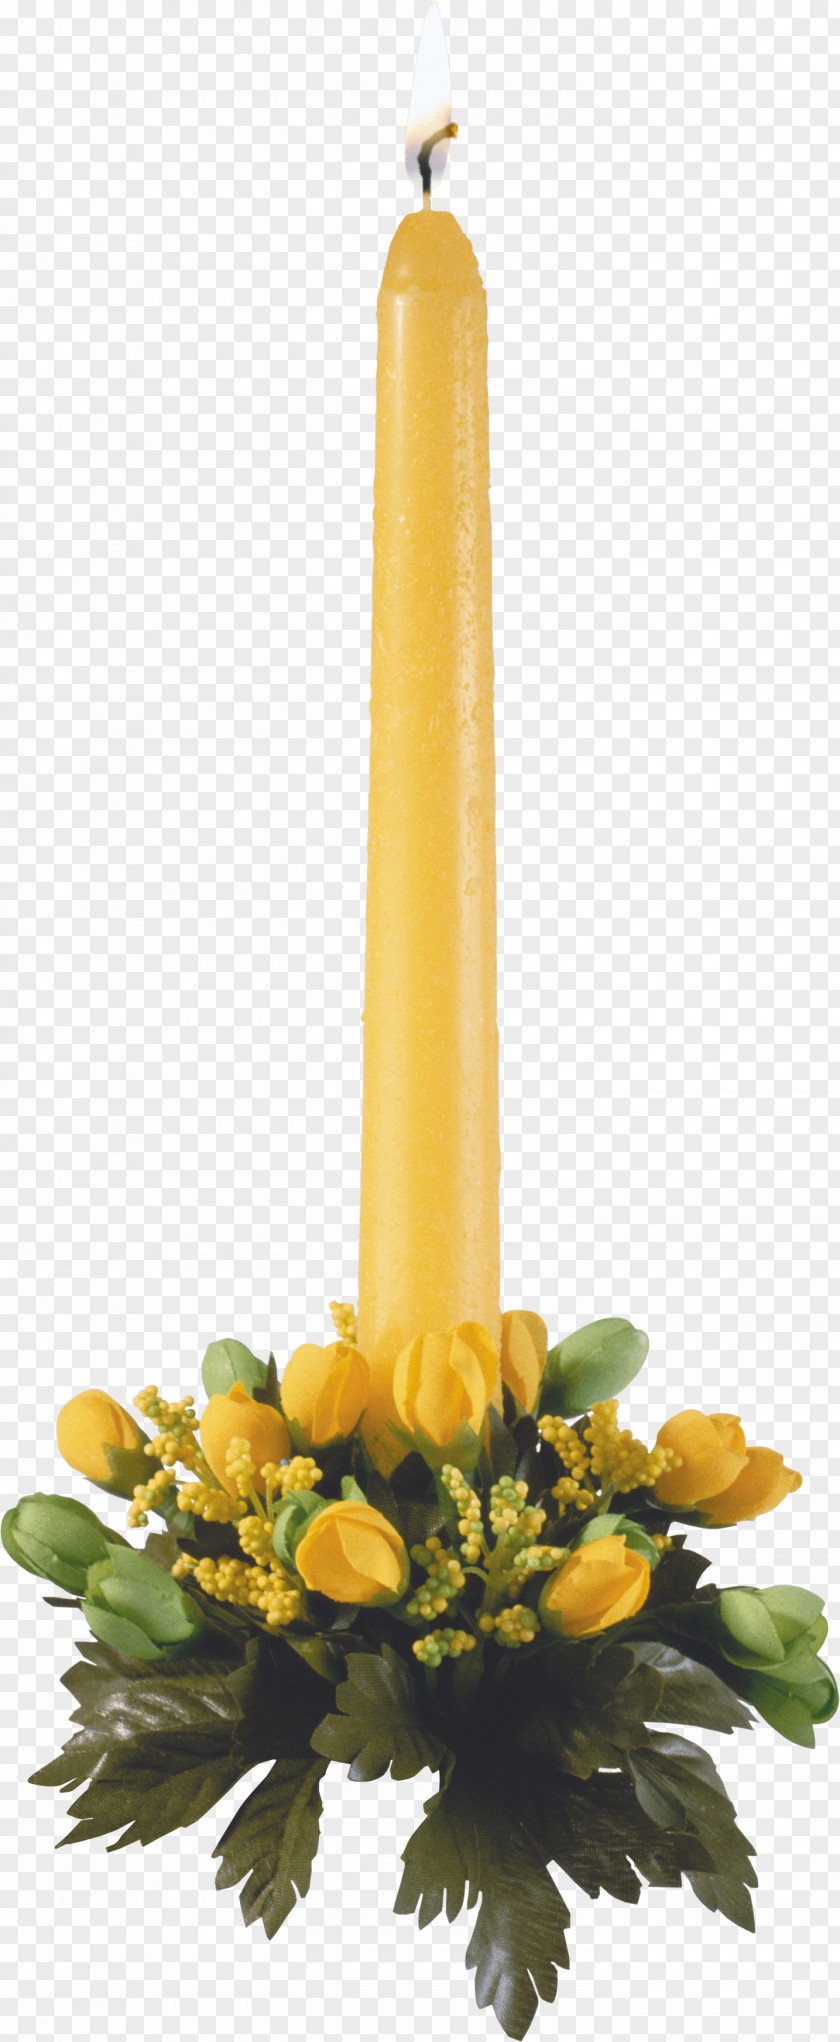 Candle Image Clip Art PNG